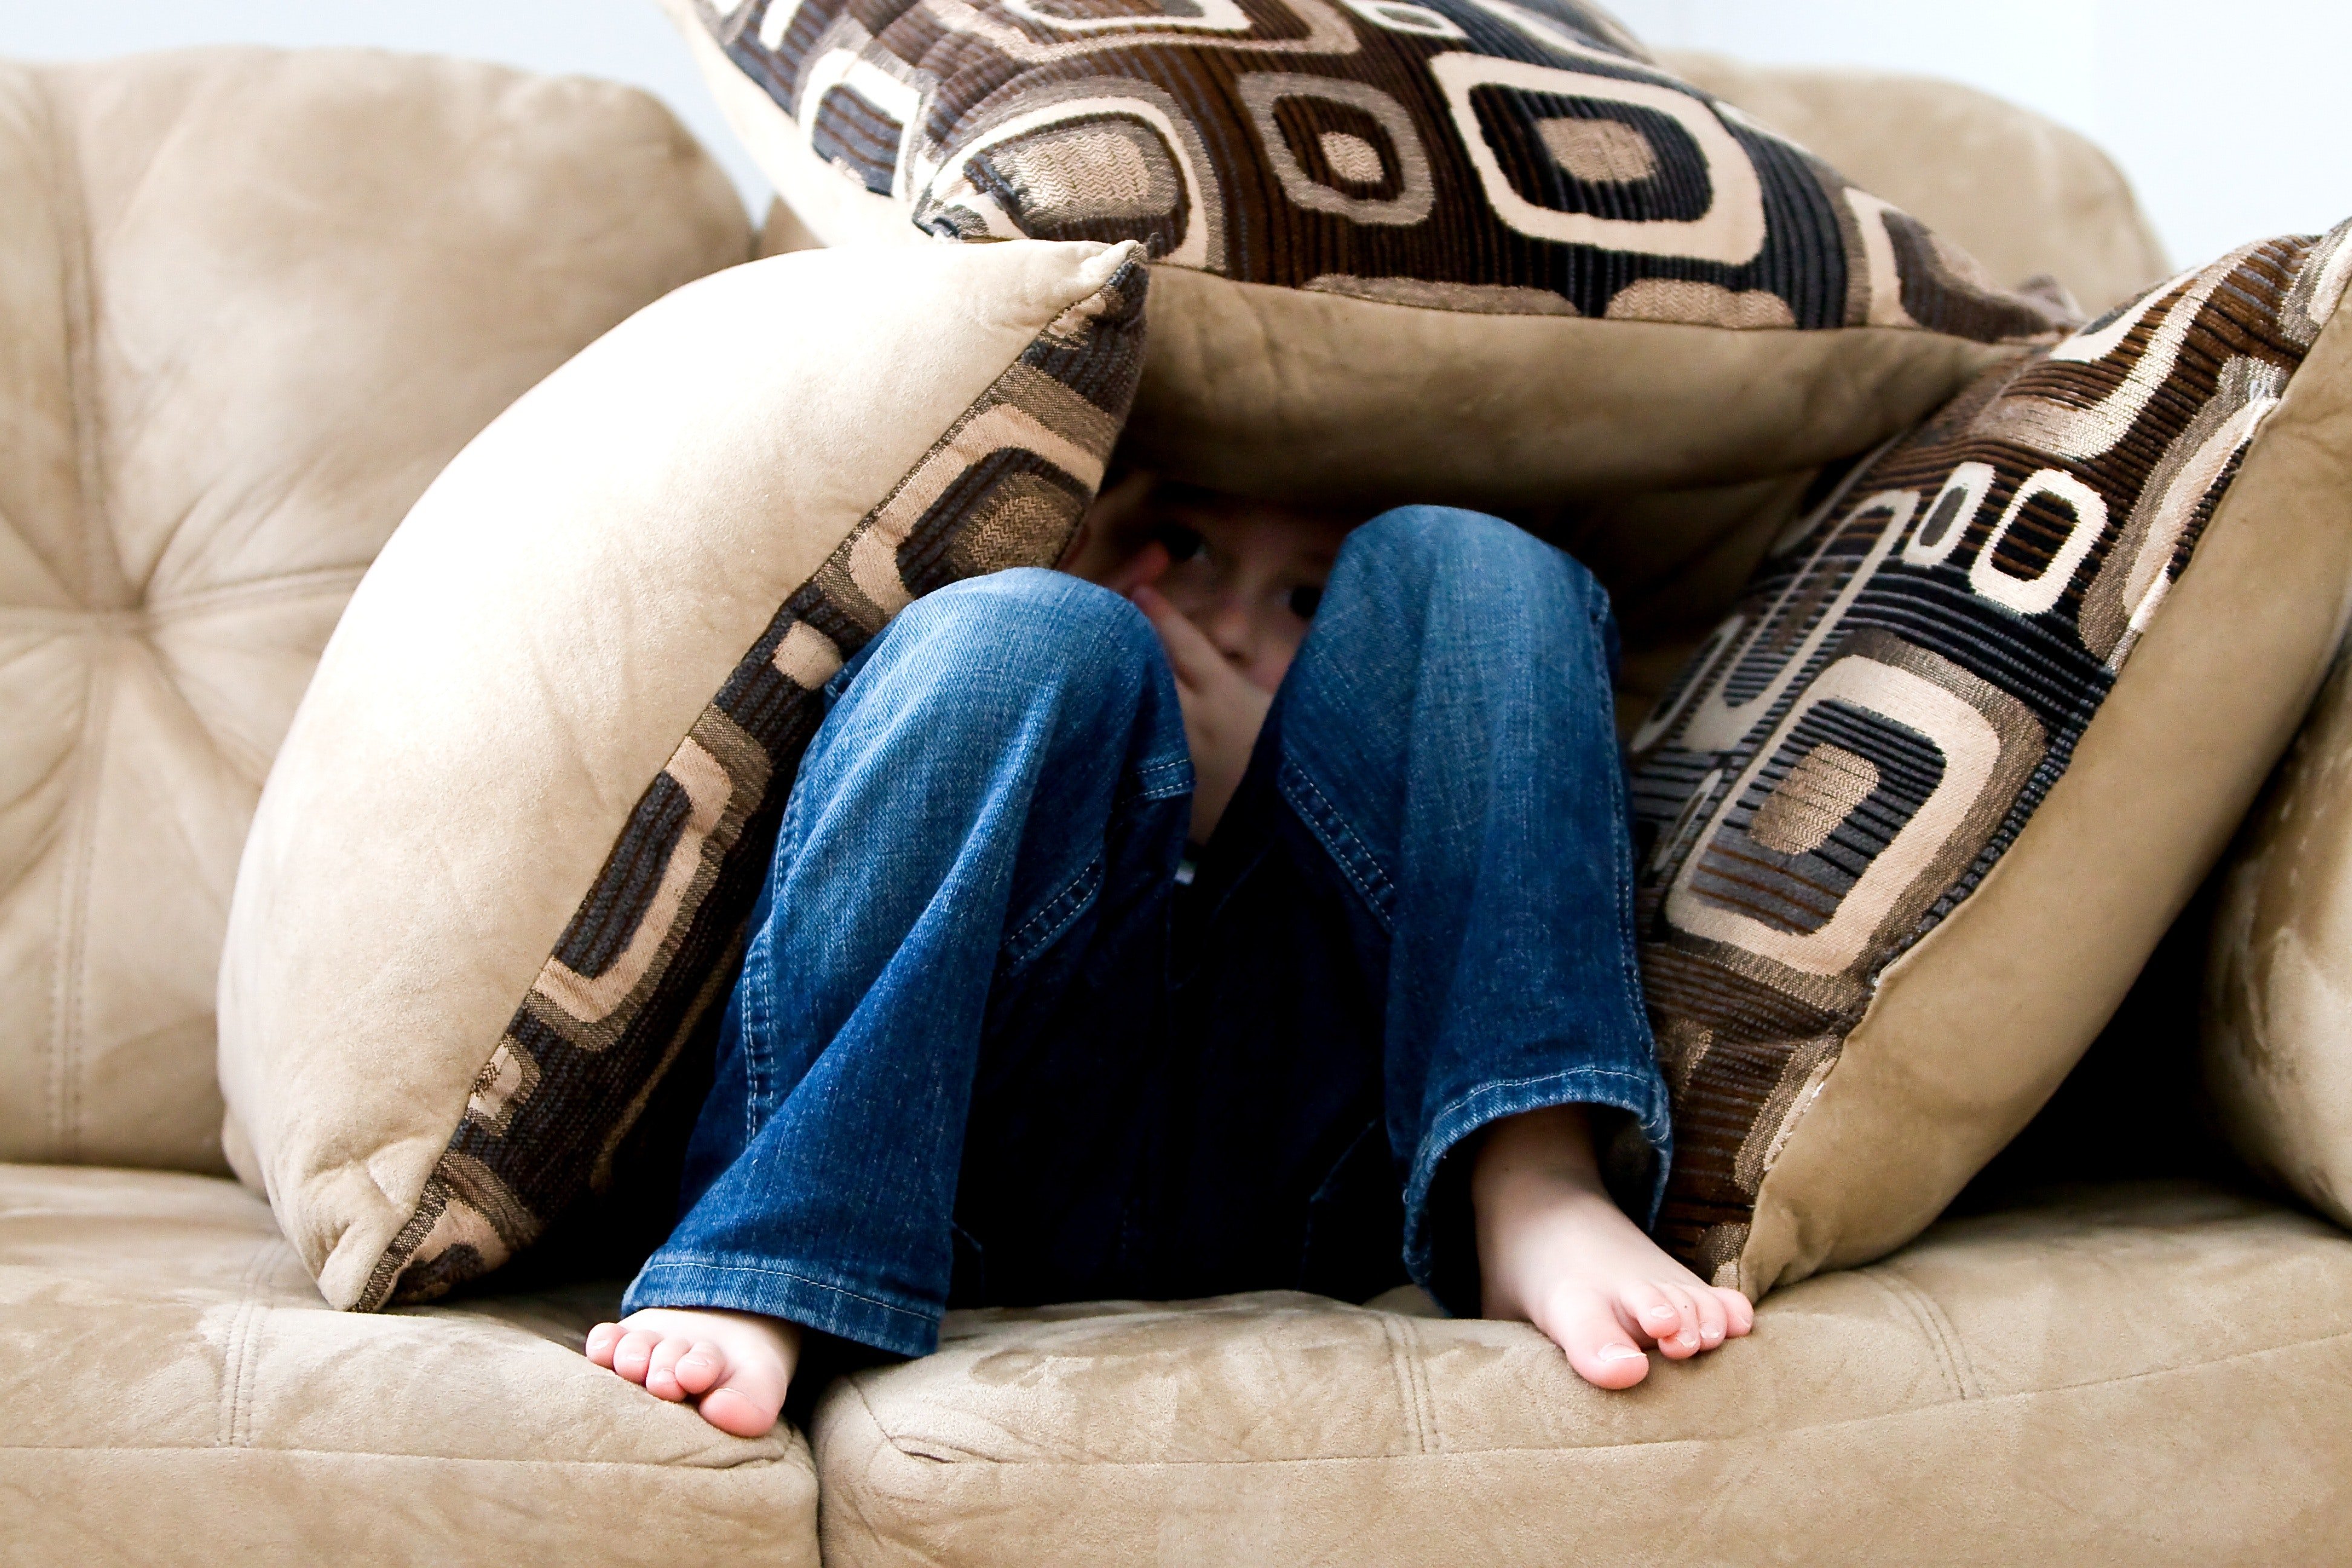 A young kid hides under the cushions of a couch. | Source: Pexels